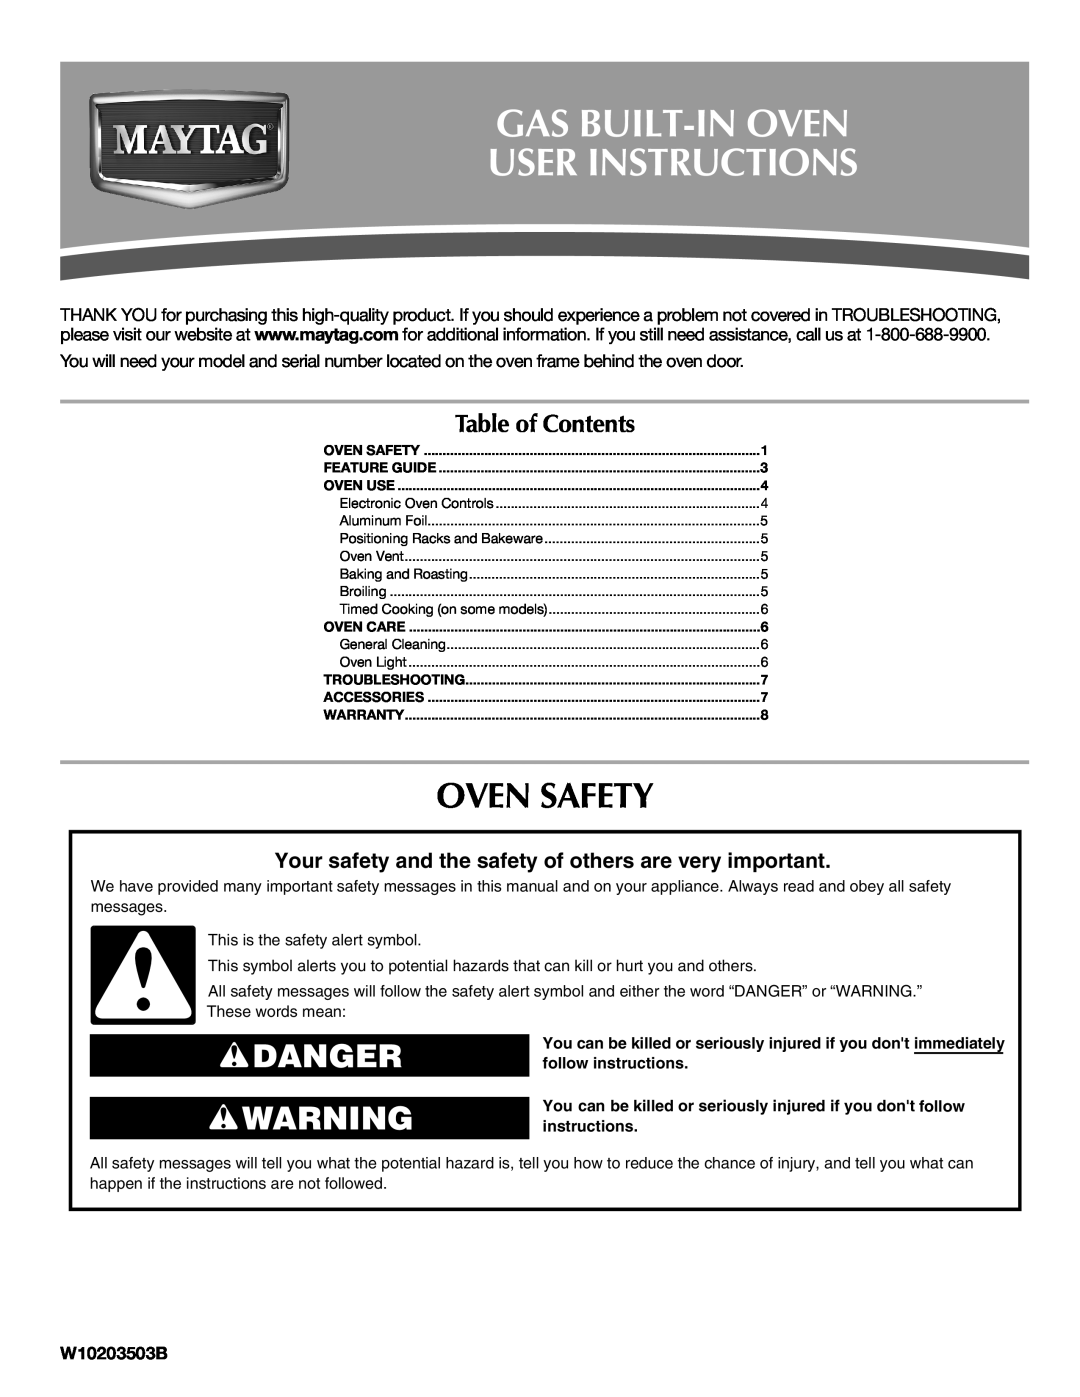 Maytag CWG3600AA warranty Oven Safety, Gas Built-Inoven User Instructions, Danger, Table of Contents, W10203503B 